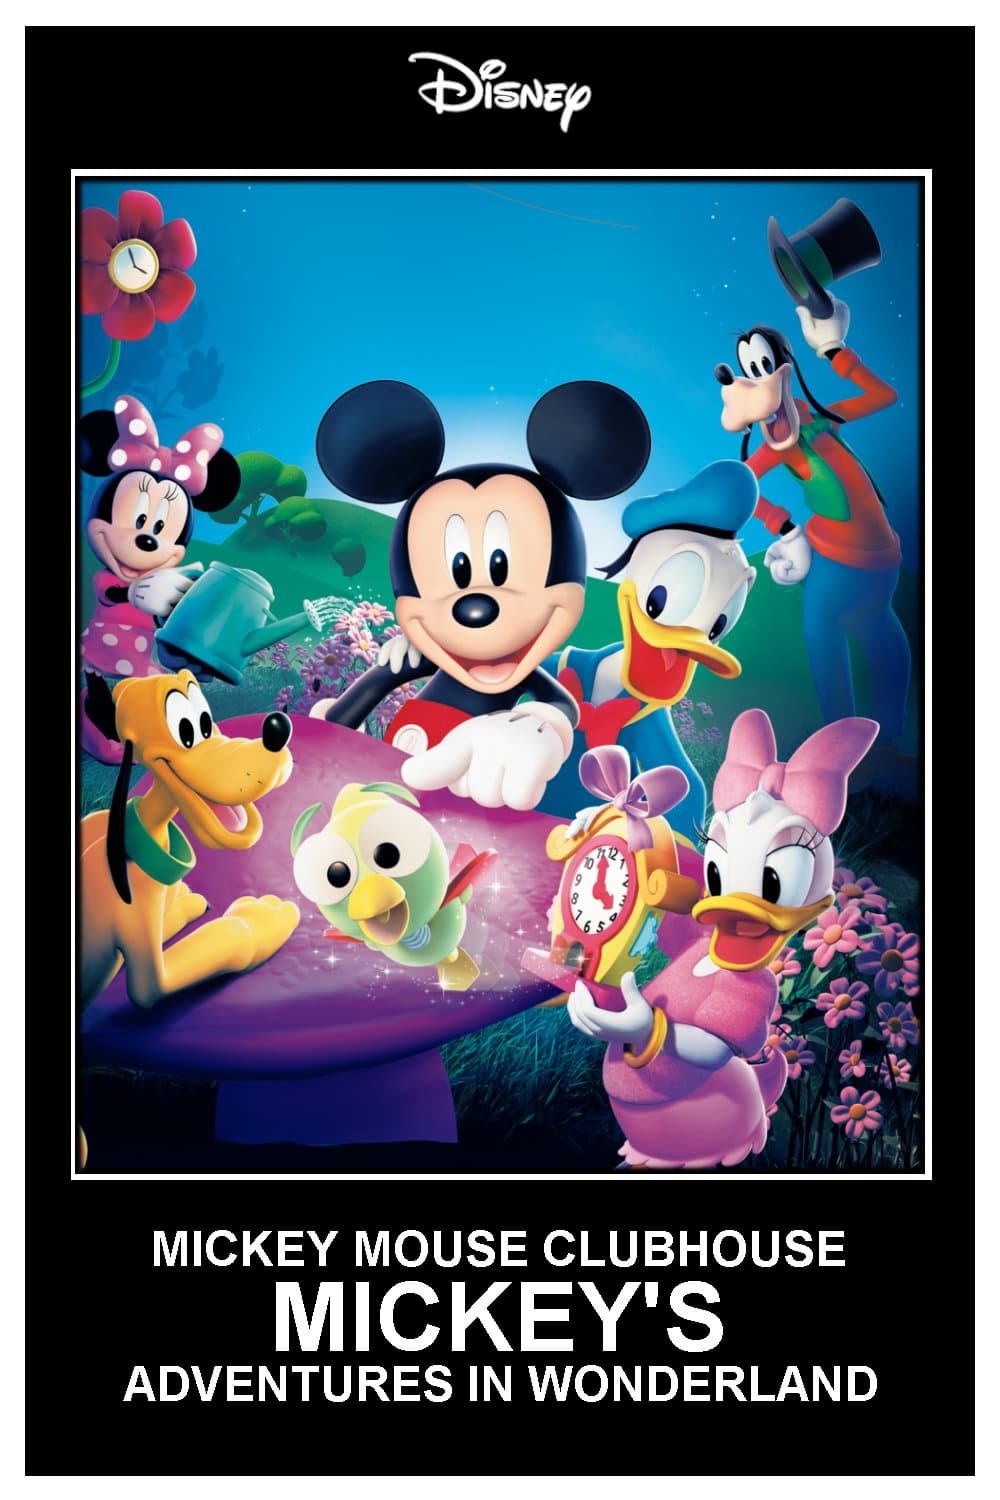 Mickey Mouse Clubhouse: Mickey's Adventures in Wonderland DVD Review